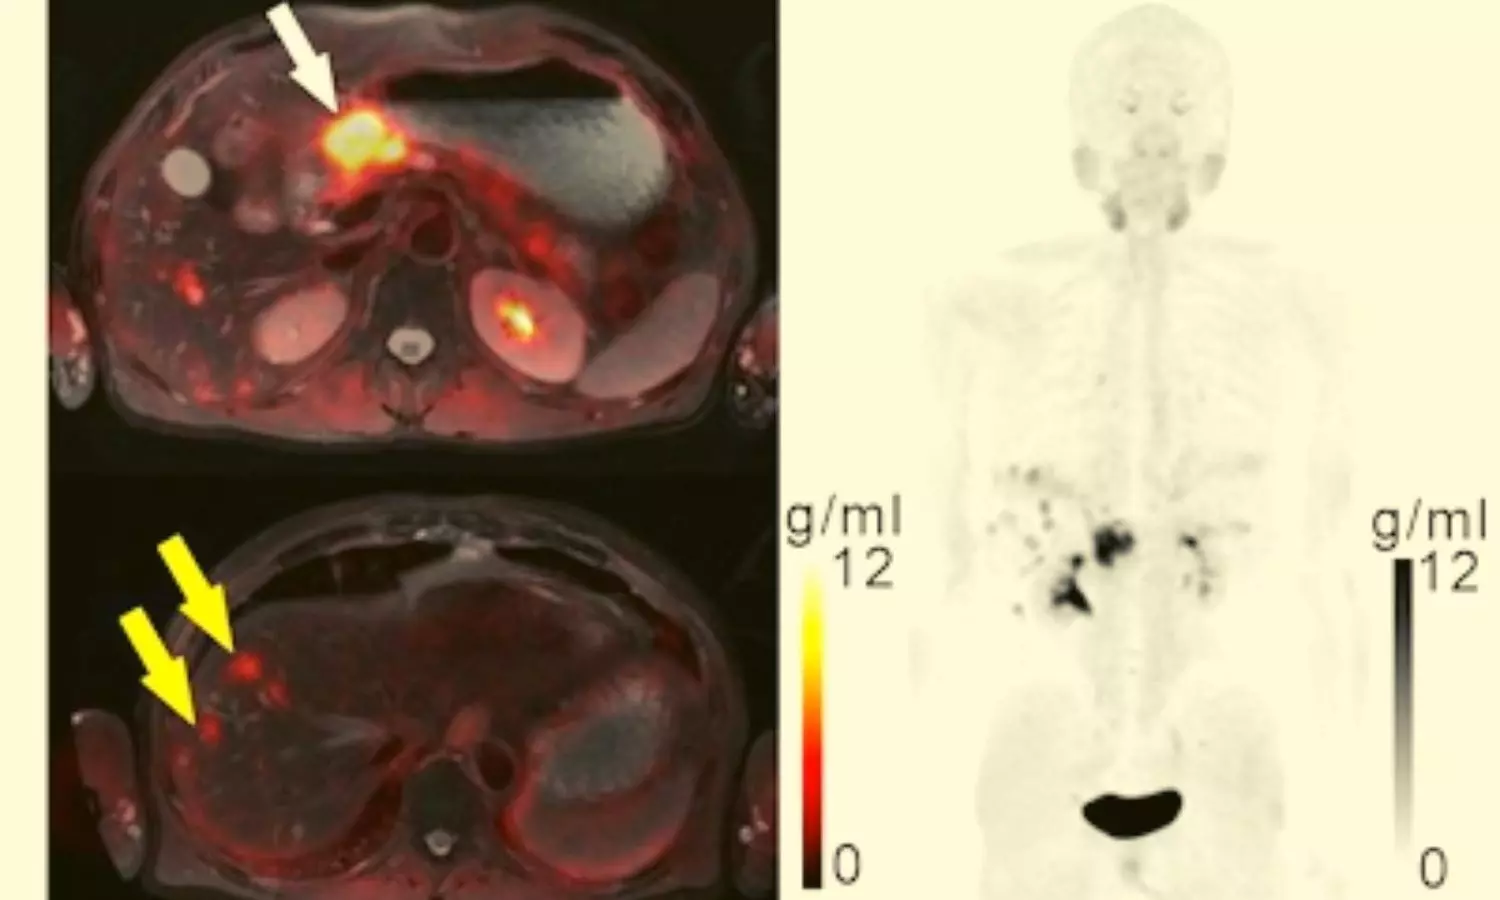 FAPI-PET better than standard molecular imaging for diagnosis of gastric cancer, study finds